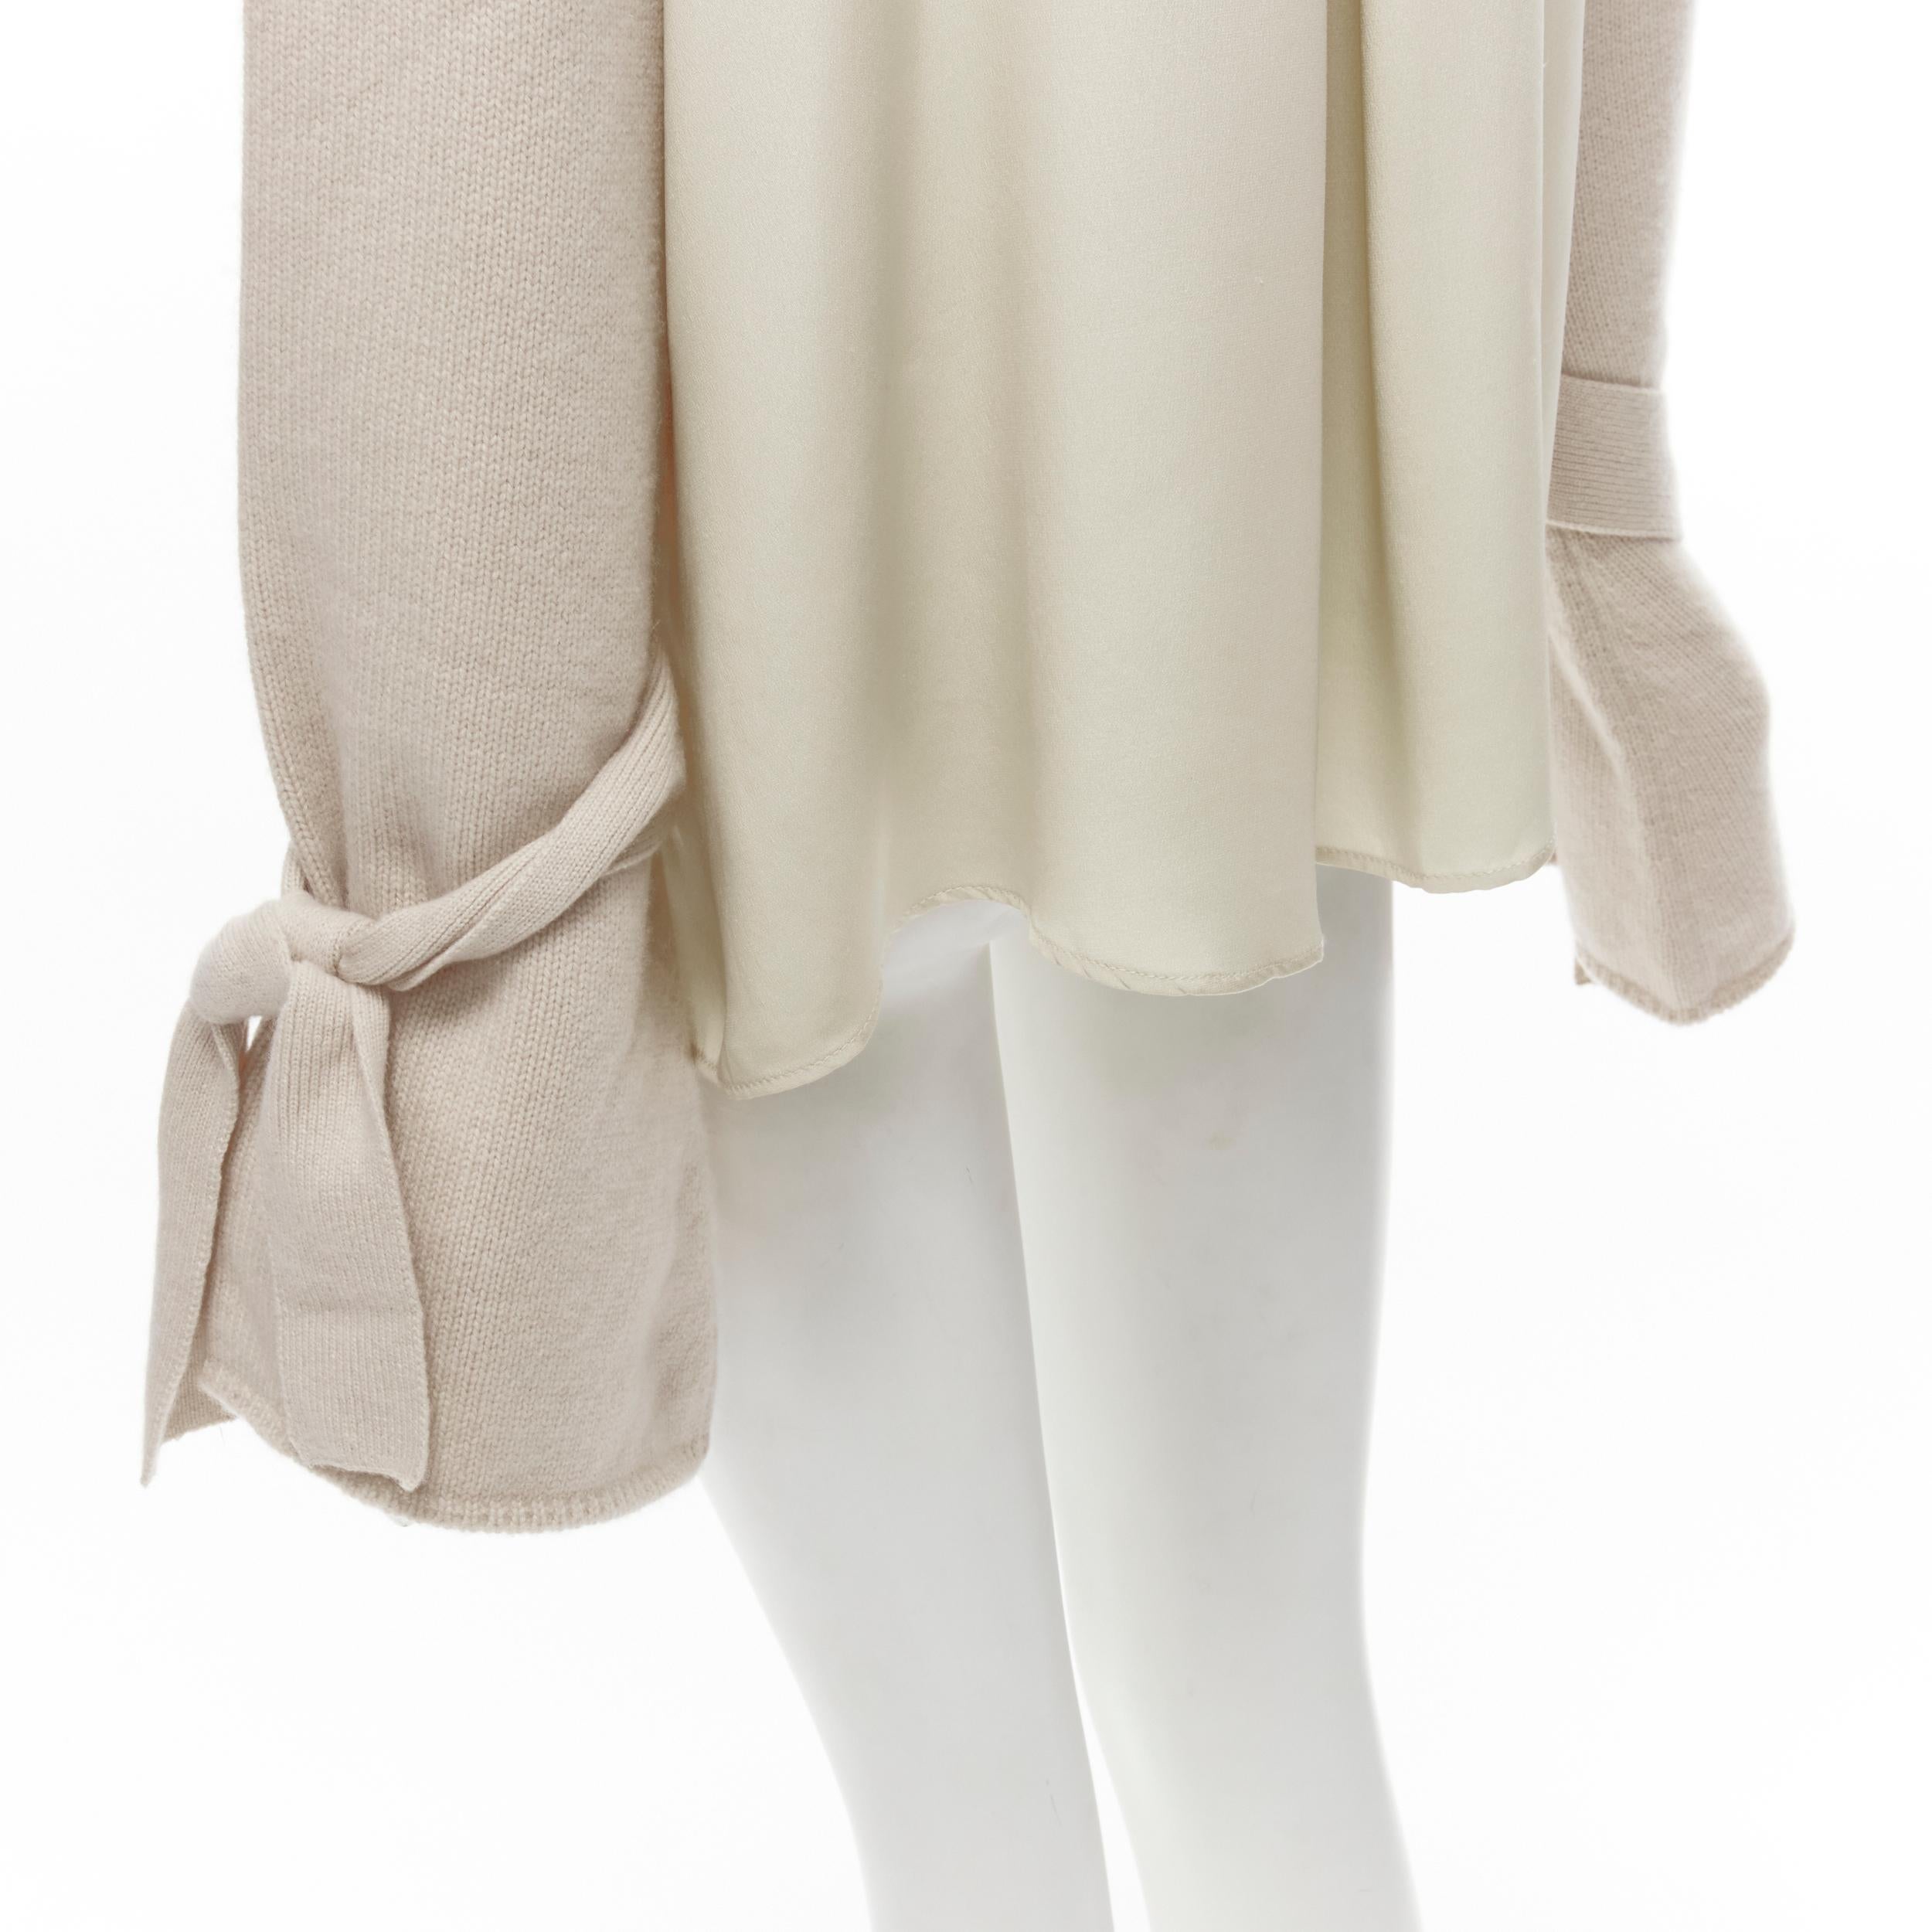 TIBI 100% cashmere beige contrast bow tie cuff oversized sweater S
Reference: YNWG/A00151
Brand: Tibi
Material: Cashmere, Silk
Color: Beige
Pattern: Solid
Closure: Pullover
Extra Details: Contrasting silk back detail.
Made in: